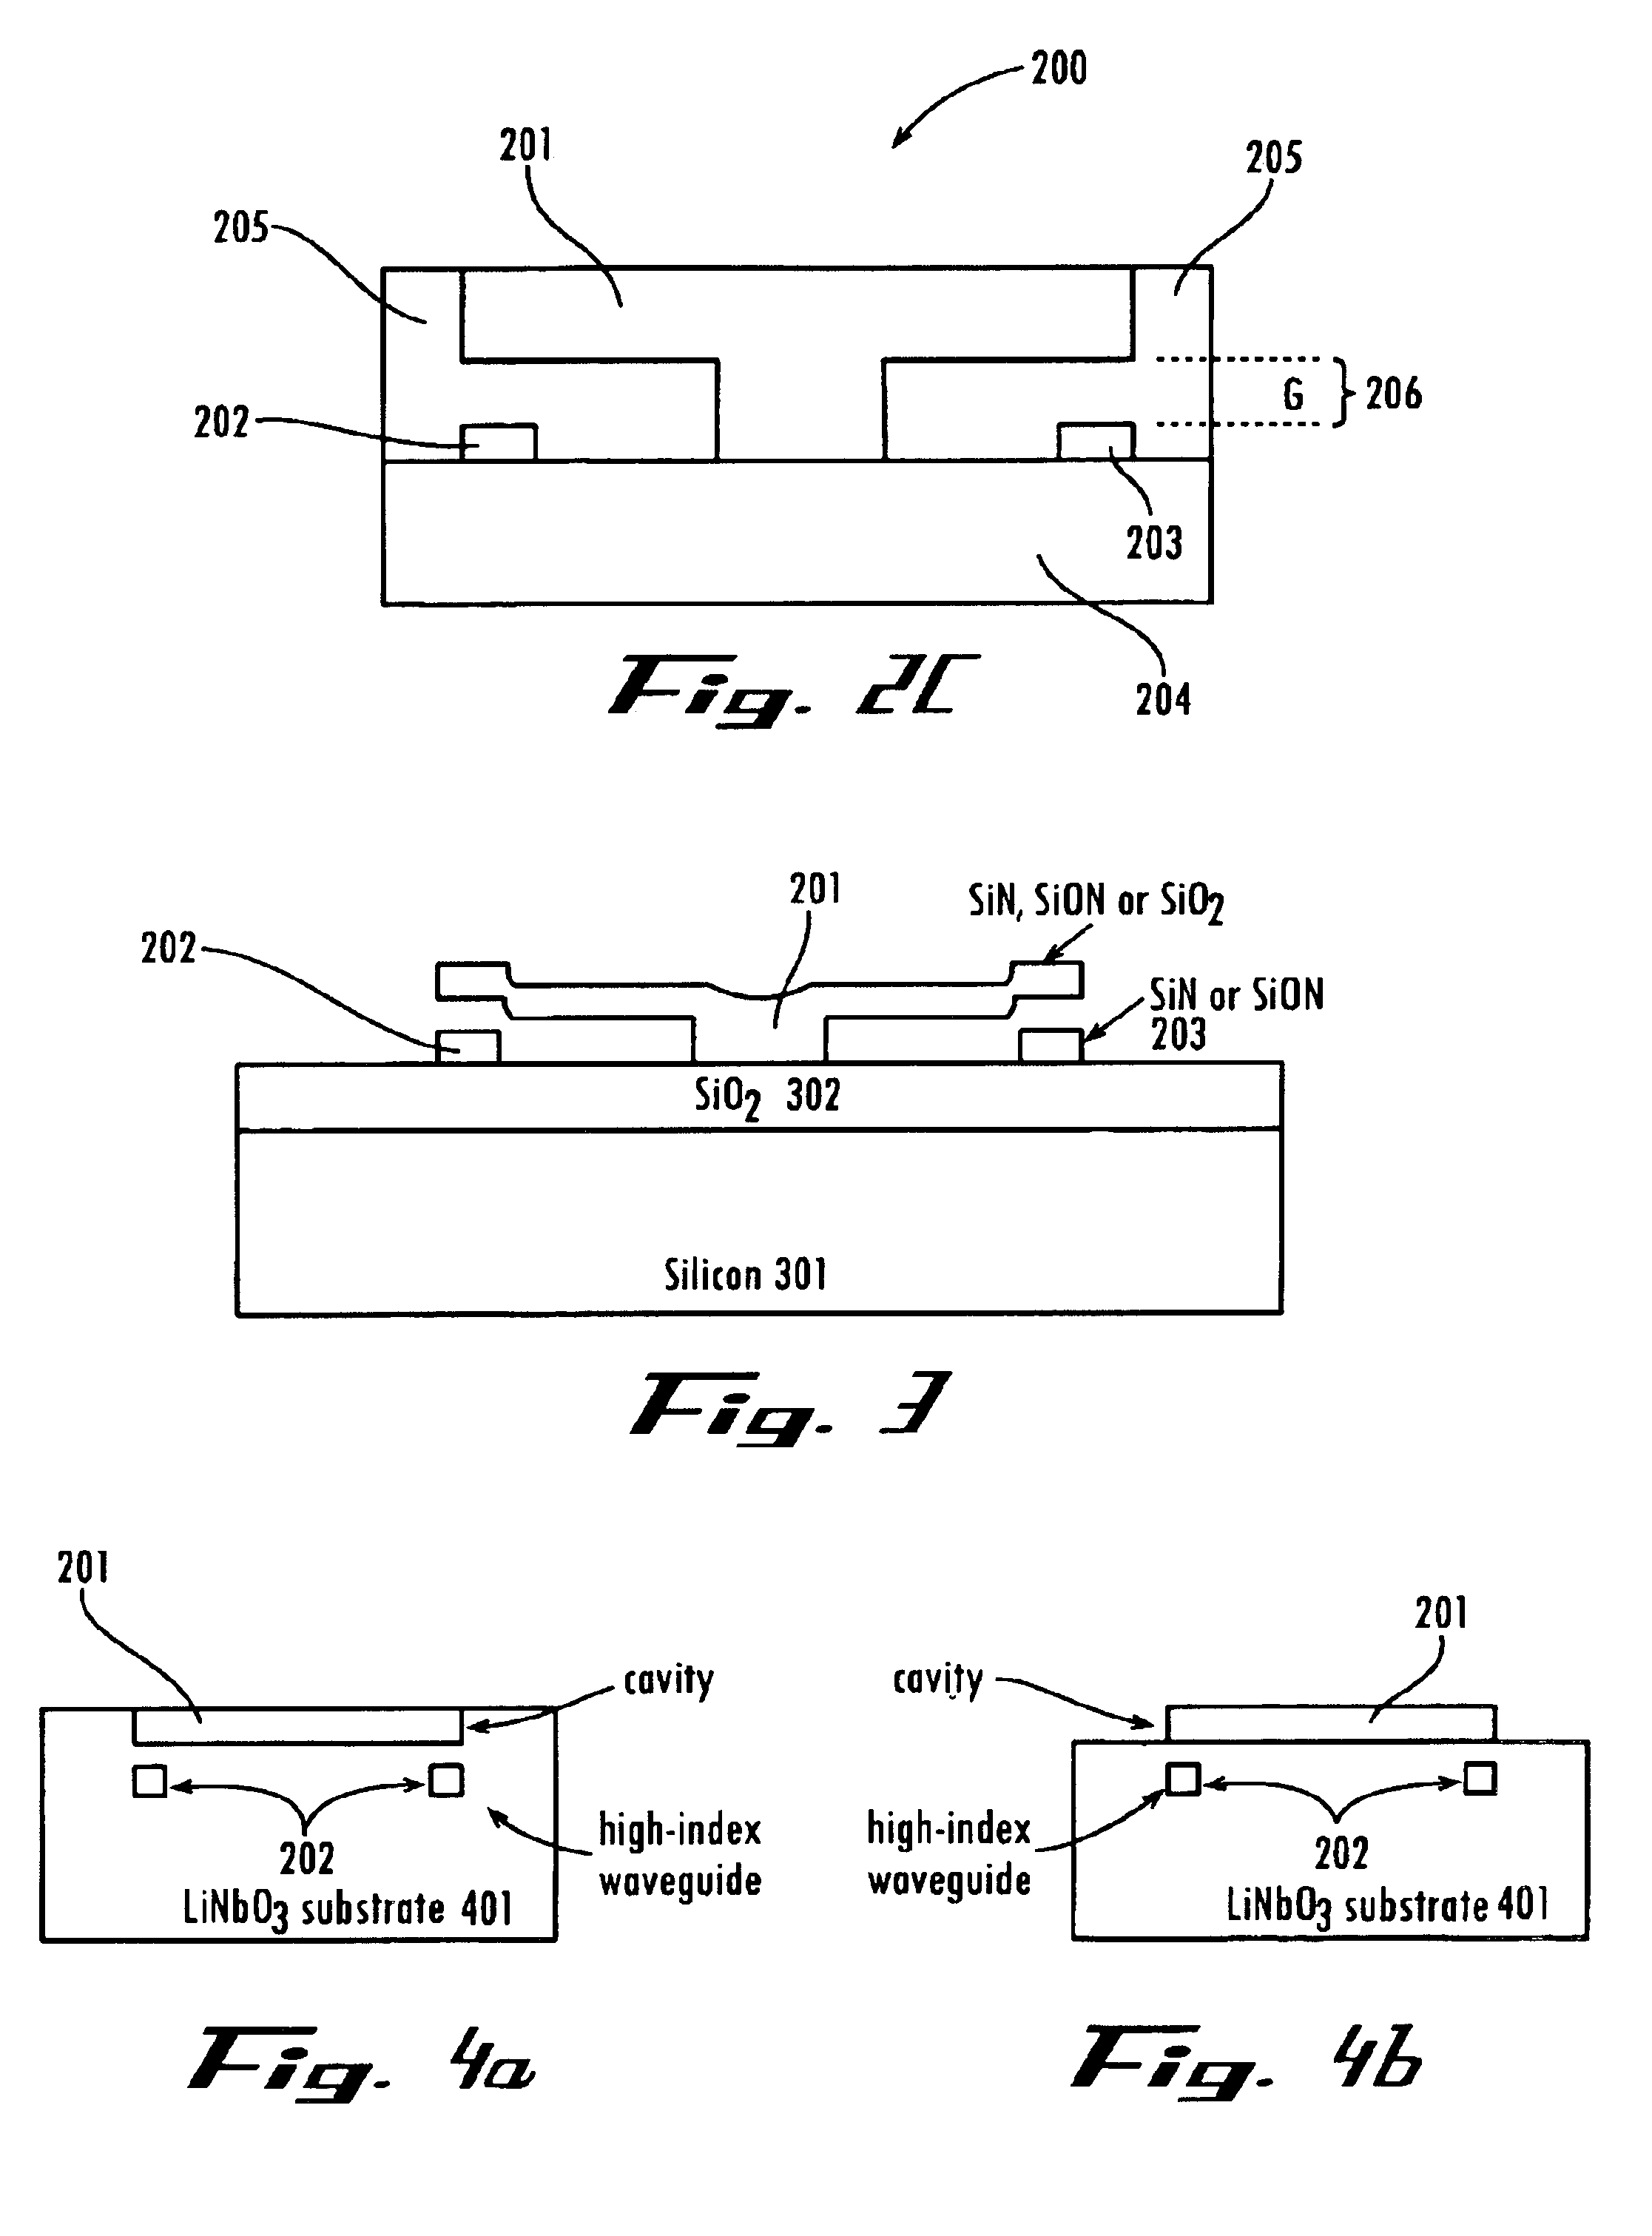 Tunable optical wavelength filters and multi-level optical integrated circuits